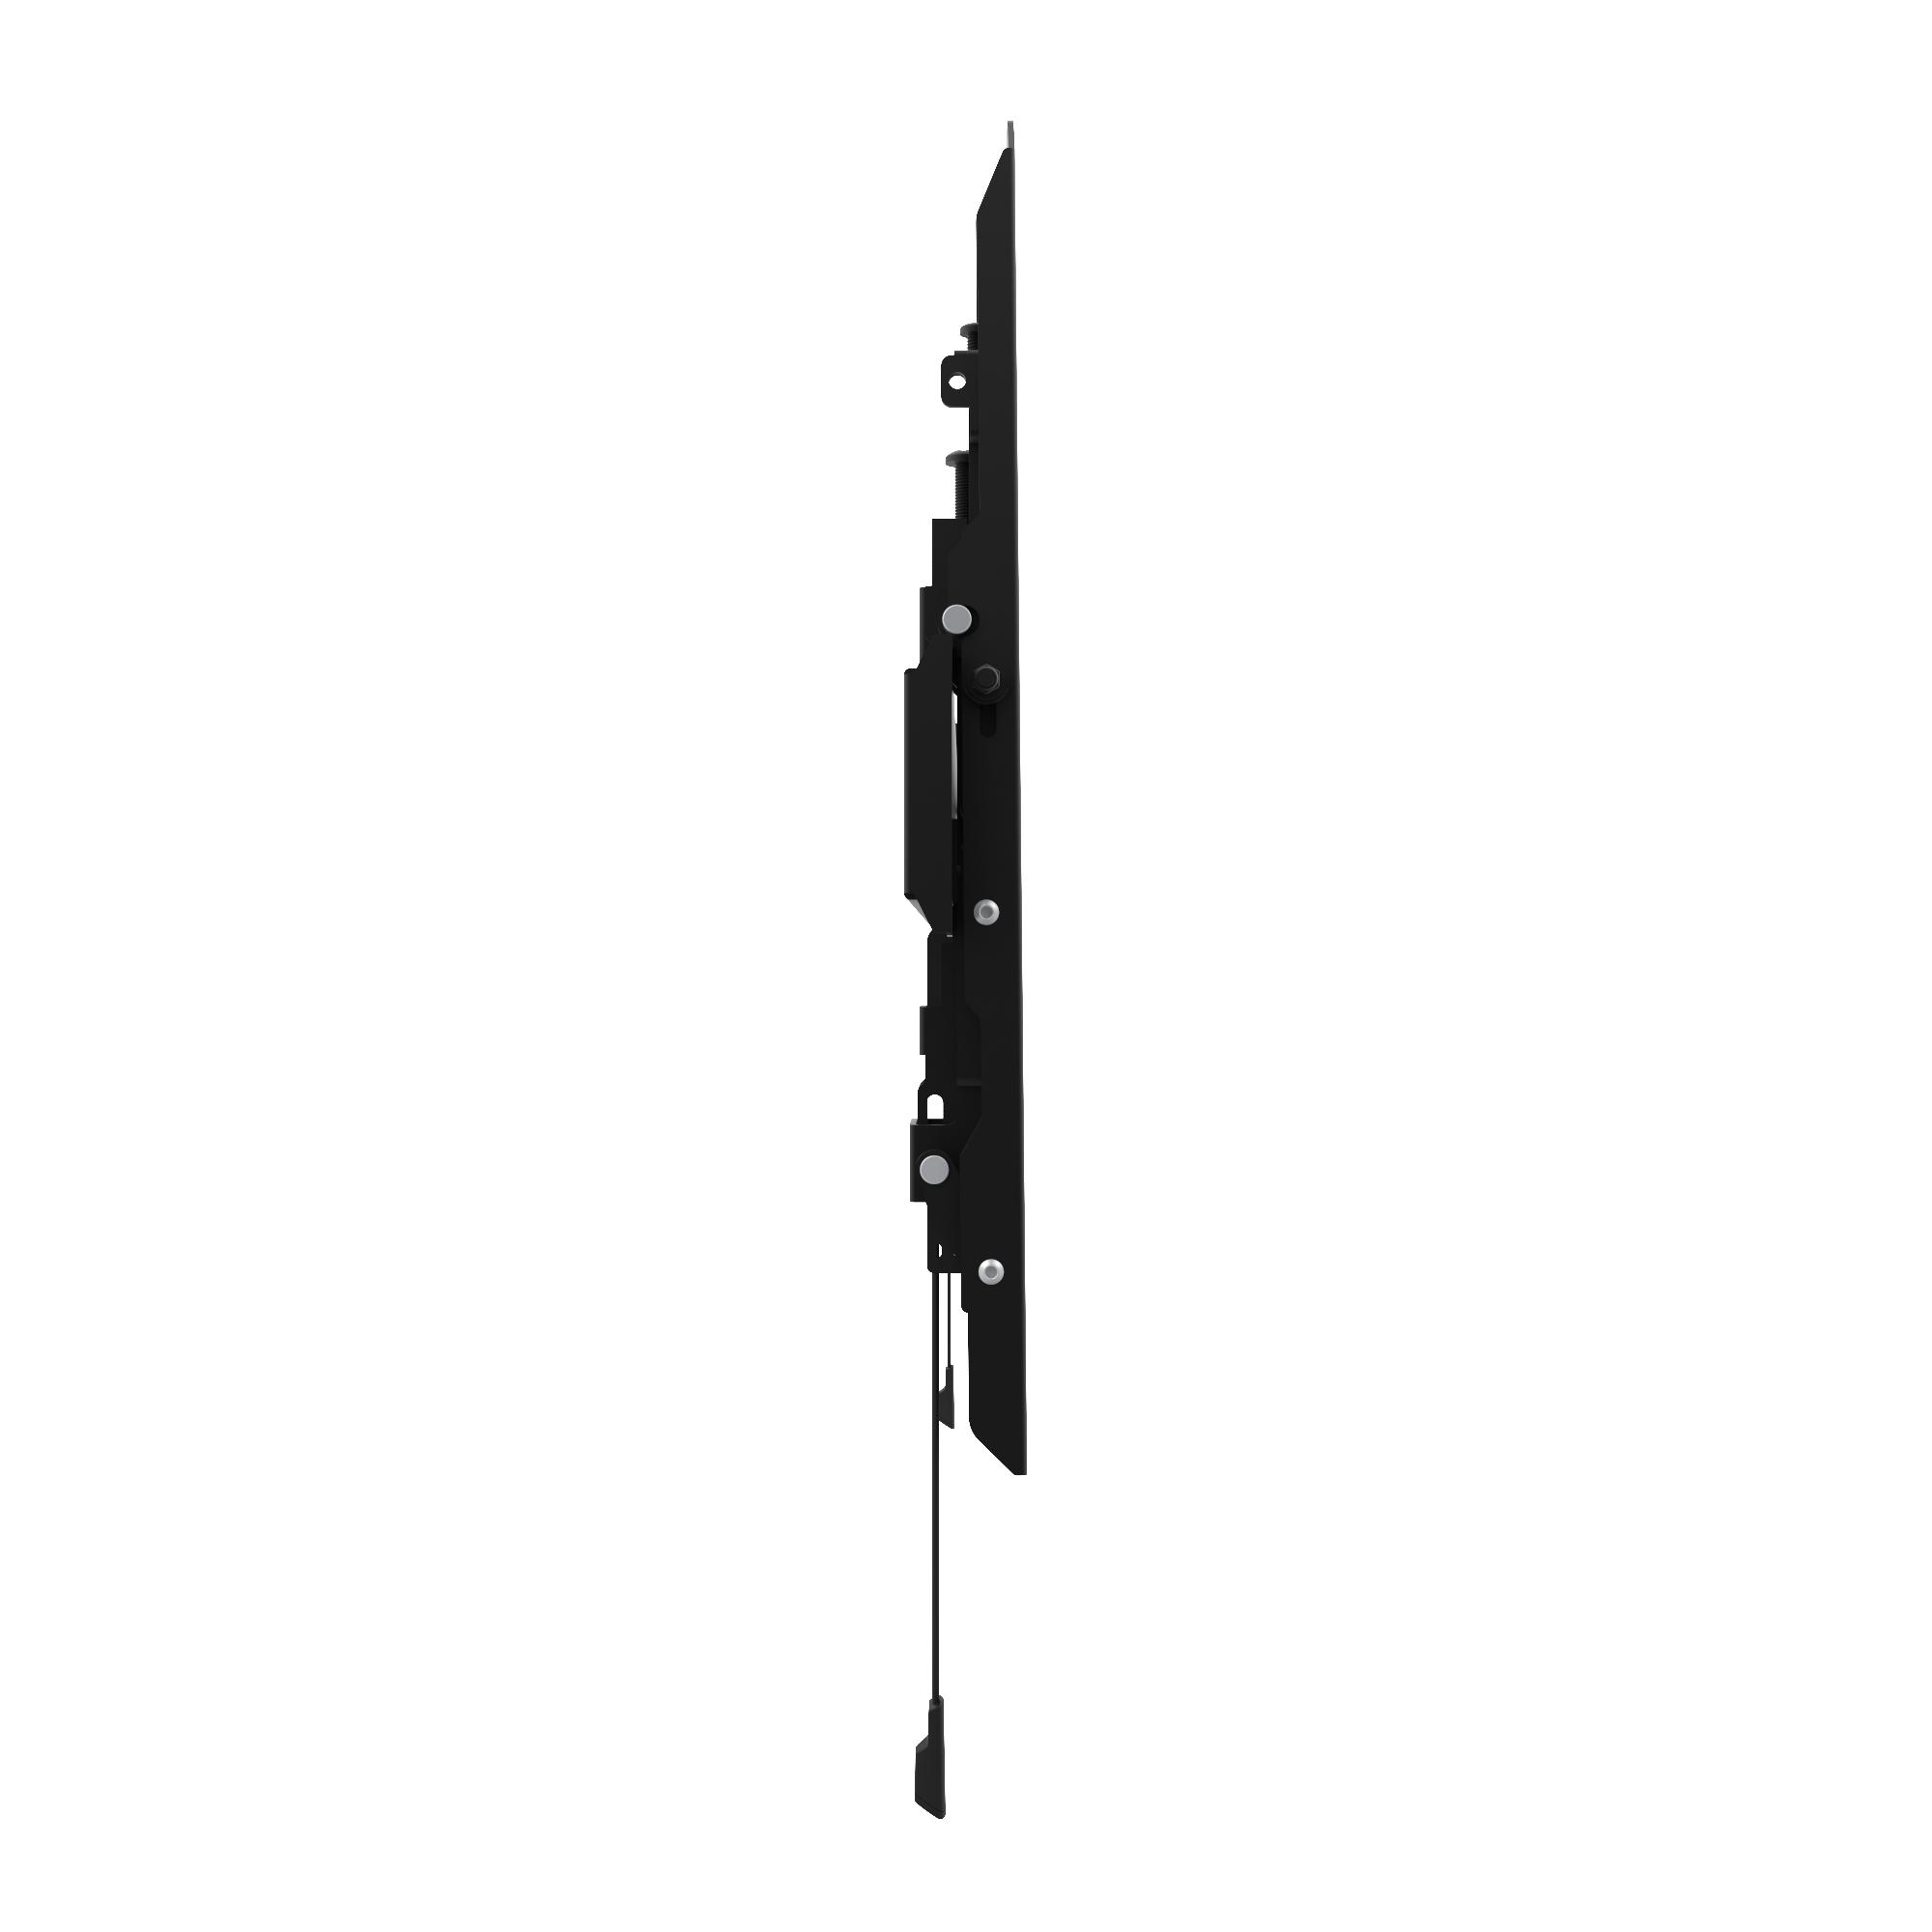 Kanto PT300 Tilting Wall Mount for 32-70 inch Displays - Click Image to Close